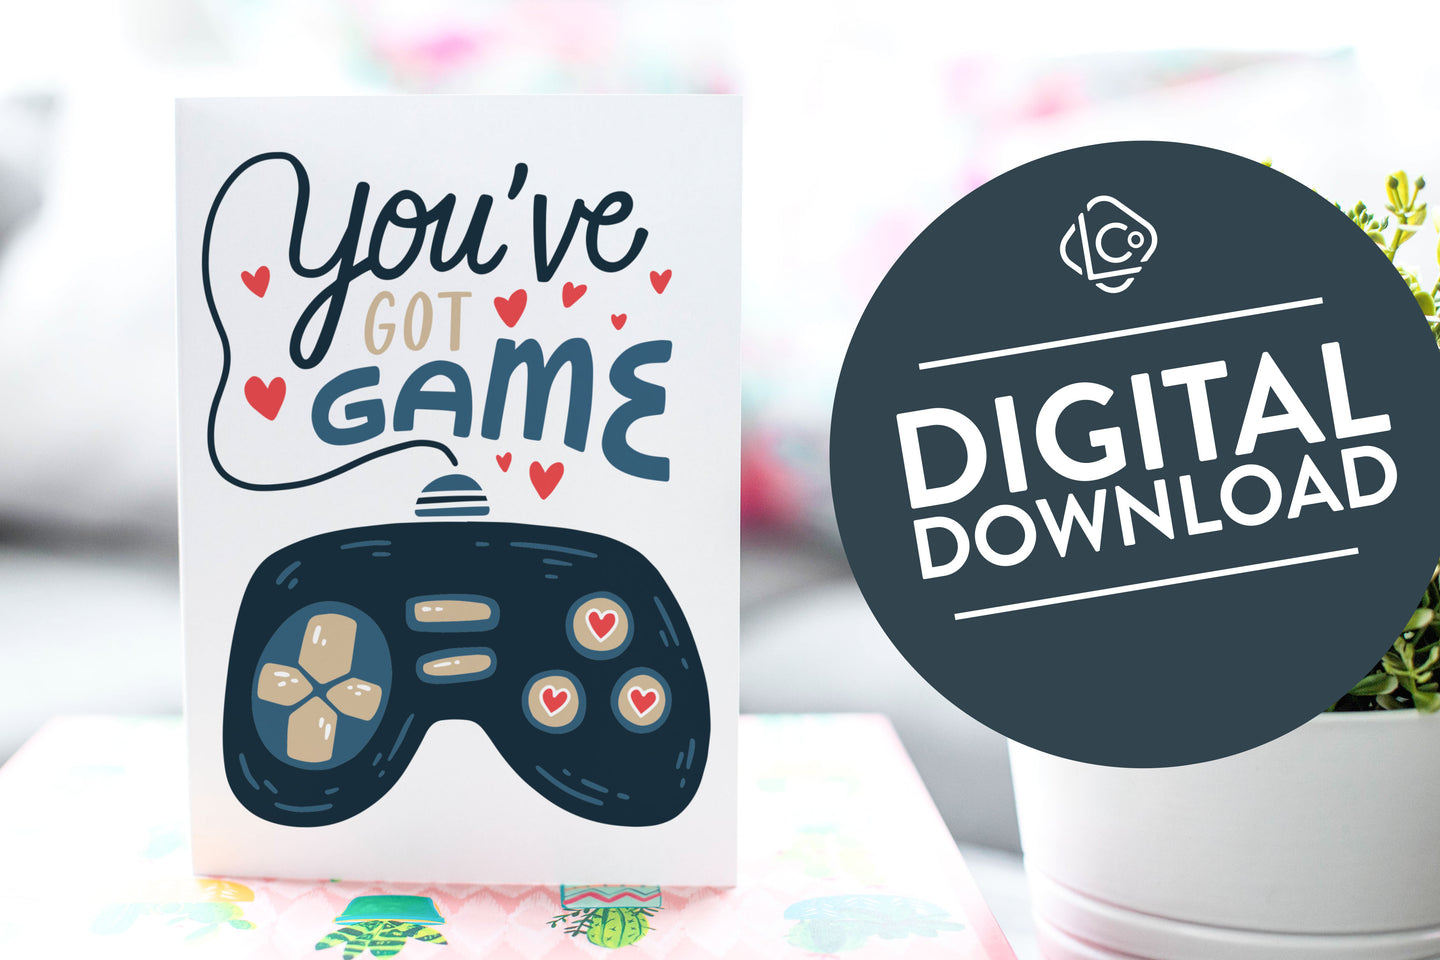 A greeting card is on a table top with a gift in pink wrapping paper. Next to the gift is a white plant pot with a green plant. The card features the words “You’ve got game” with an illustrated gaming controller.. The words 